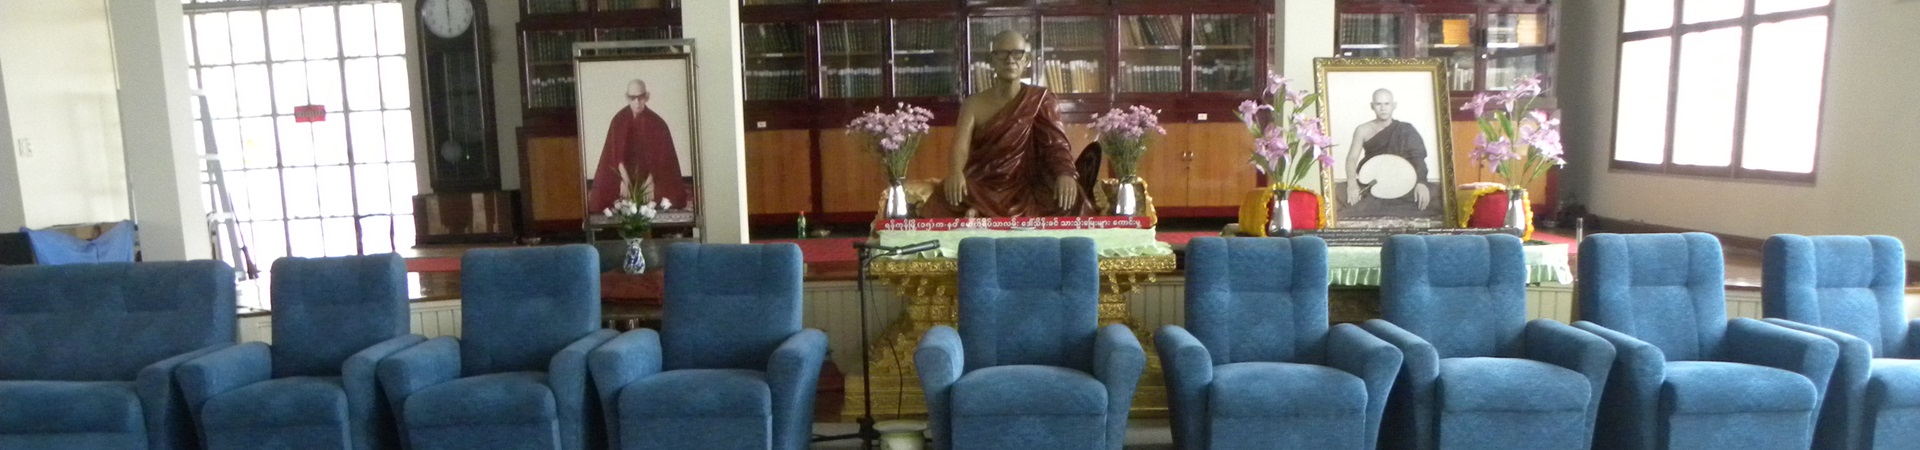 Image of Meditation in a Monastery